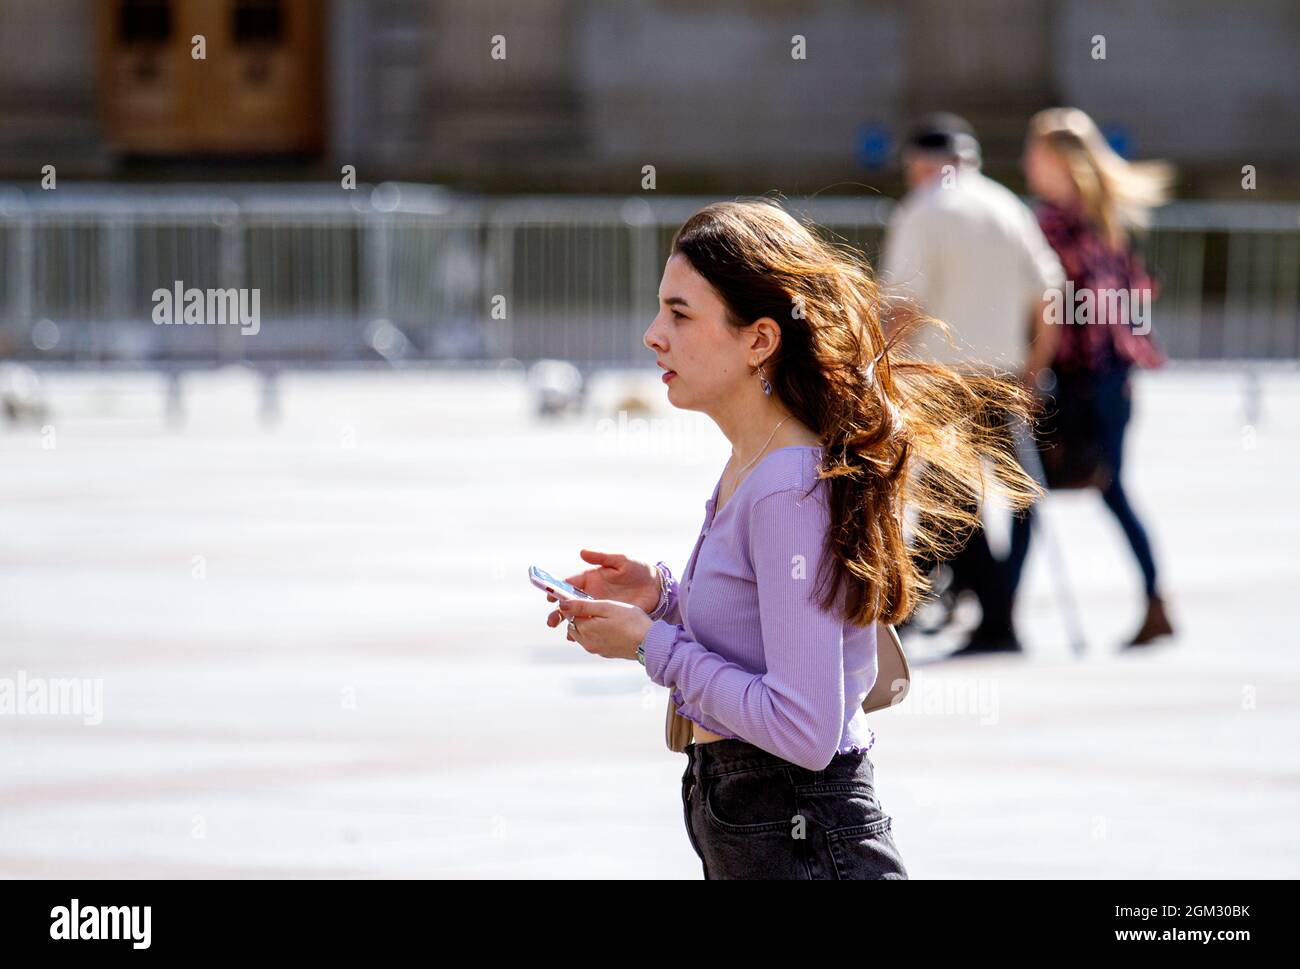 Dundee, Tayside, Scotland, UK. 16th Sep, 2021. UK weather: Warm mid September sunshine across North East Scotland with temperatures reaching 19°C. A young woman spending the day out enjoying the glorious warm sunny weather whilst talking on her mobile phone in Dundee city centre. Credit: Dundee Photographics/Alamy Live News Stock Photo